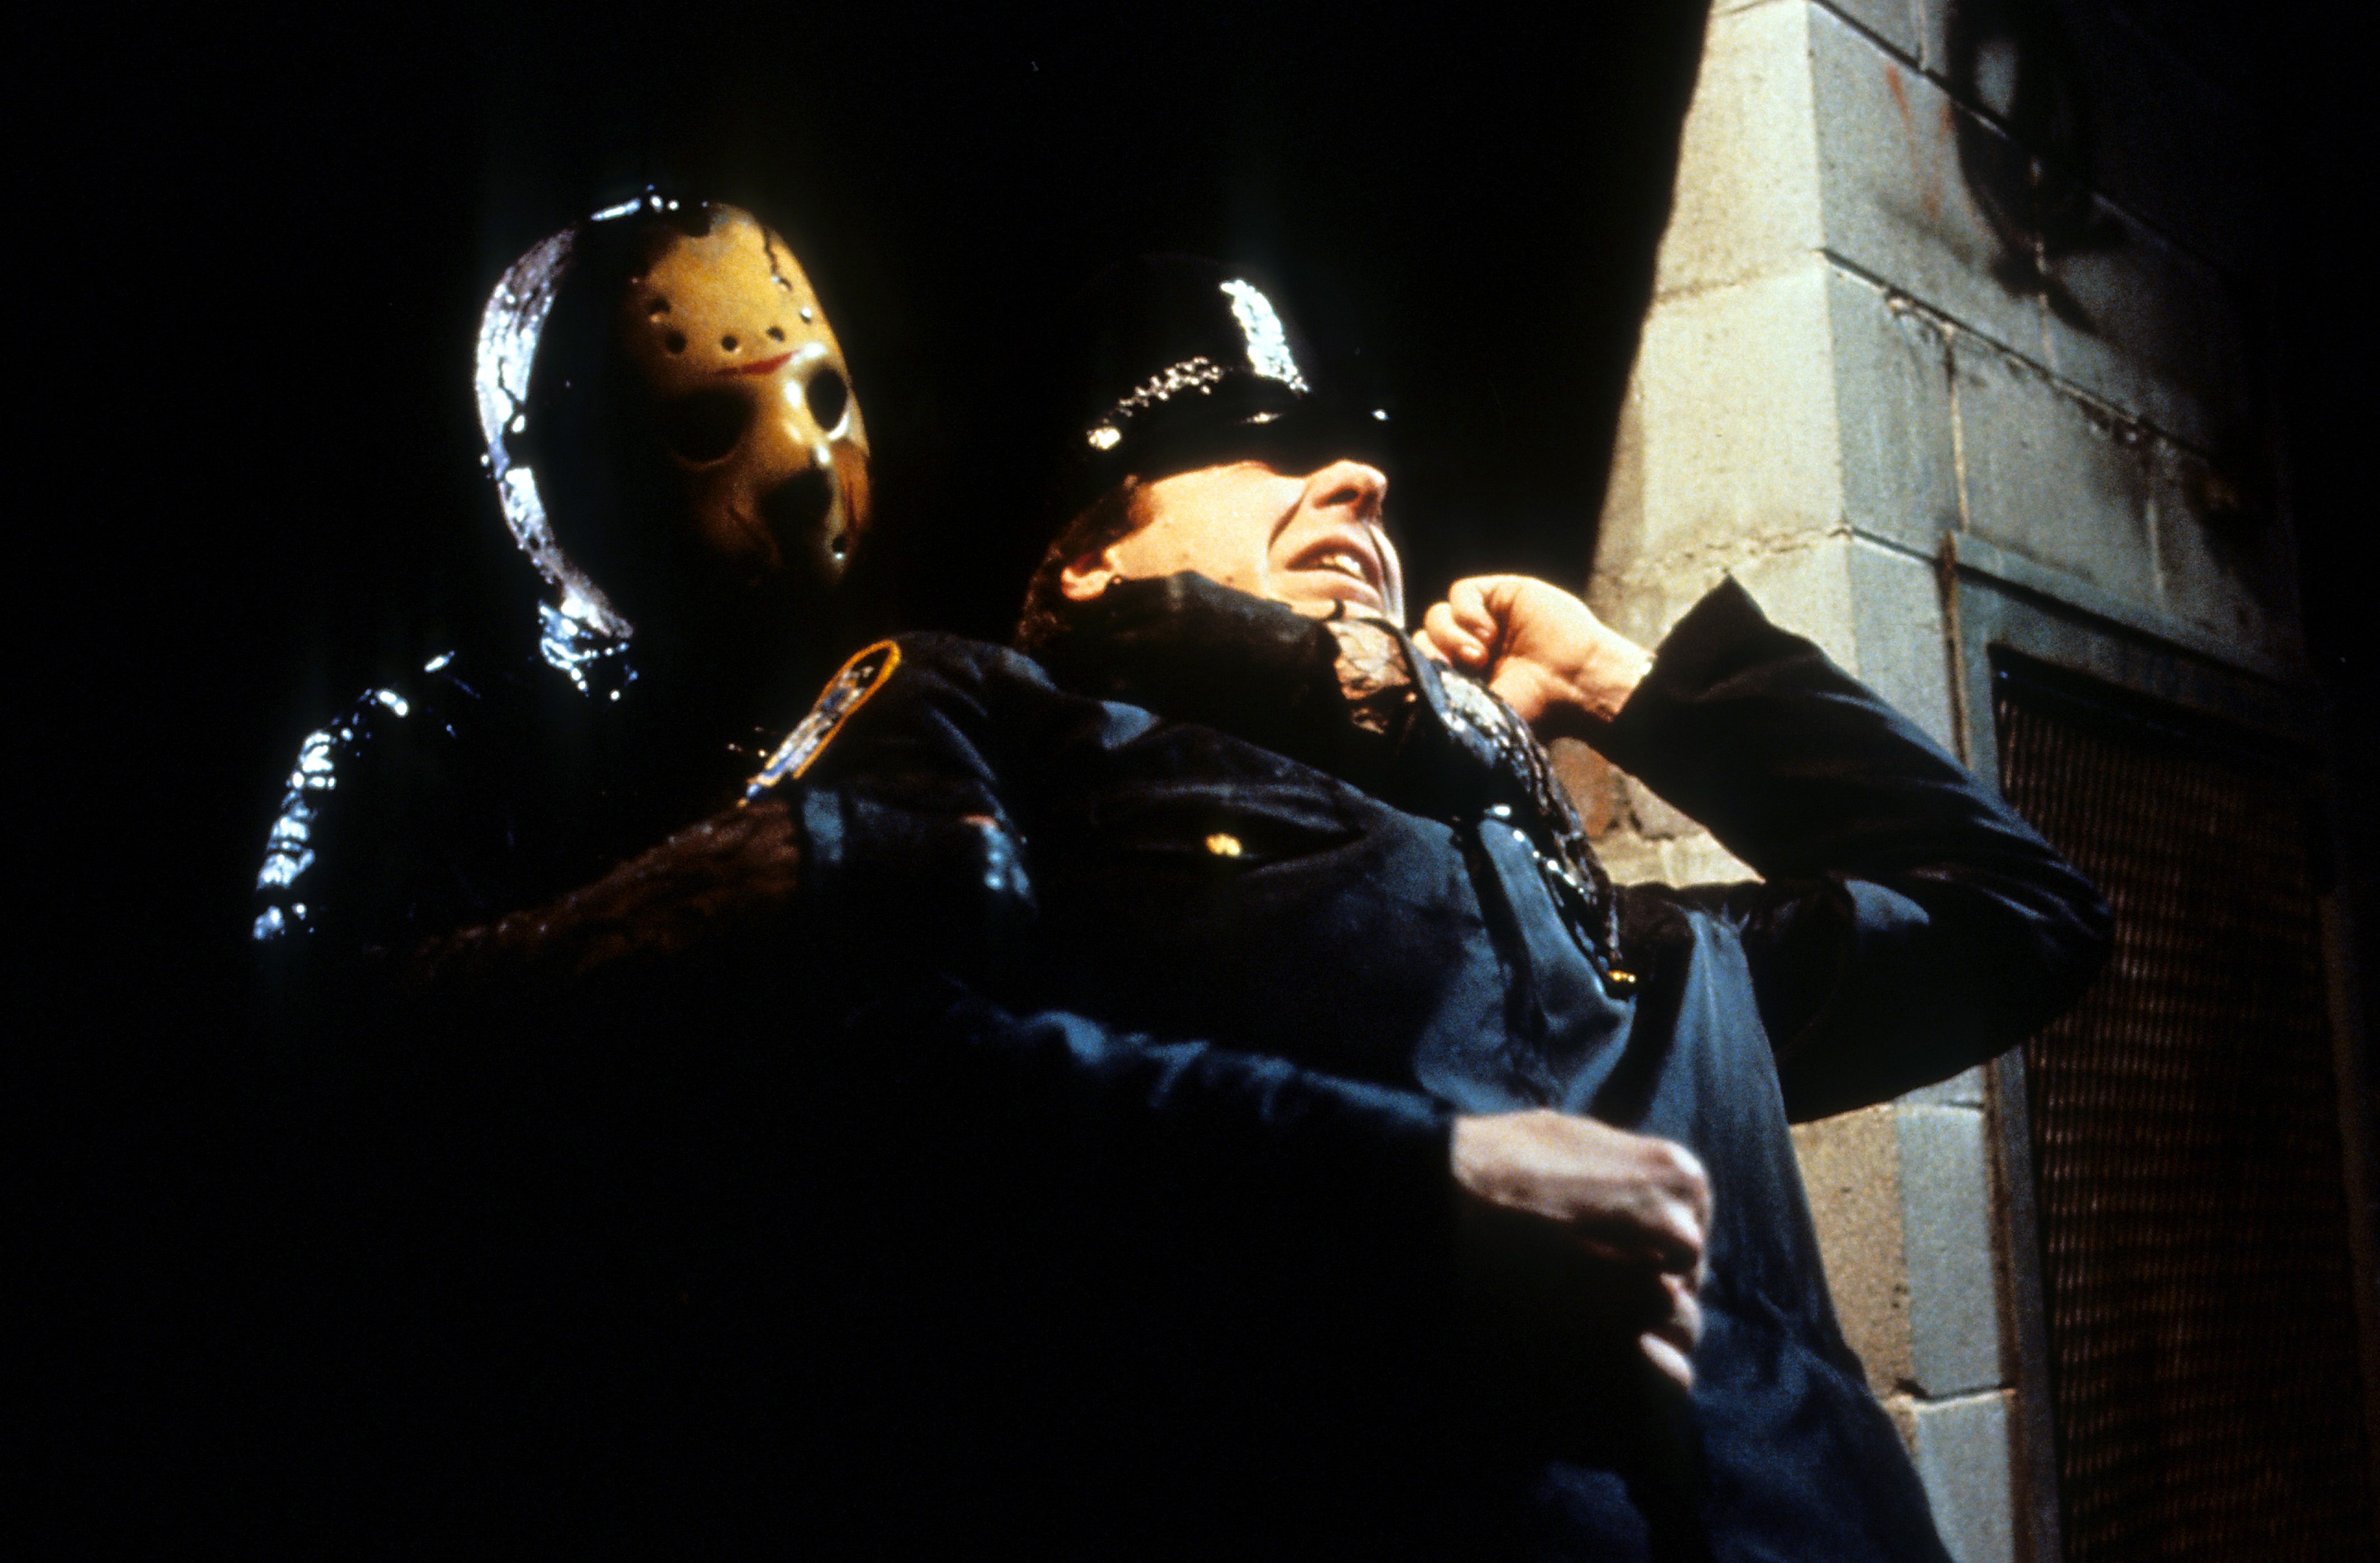 Jason Vorhees from the Friday the 13th films with a cop